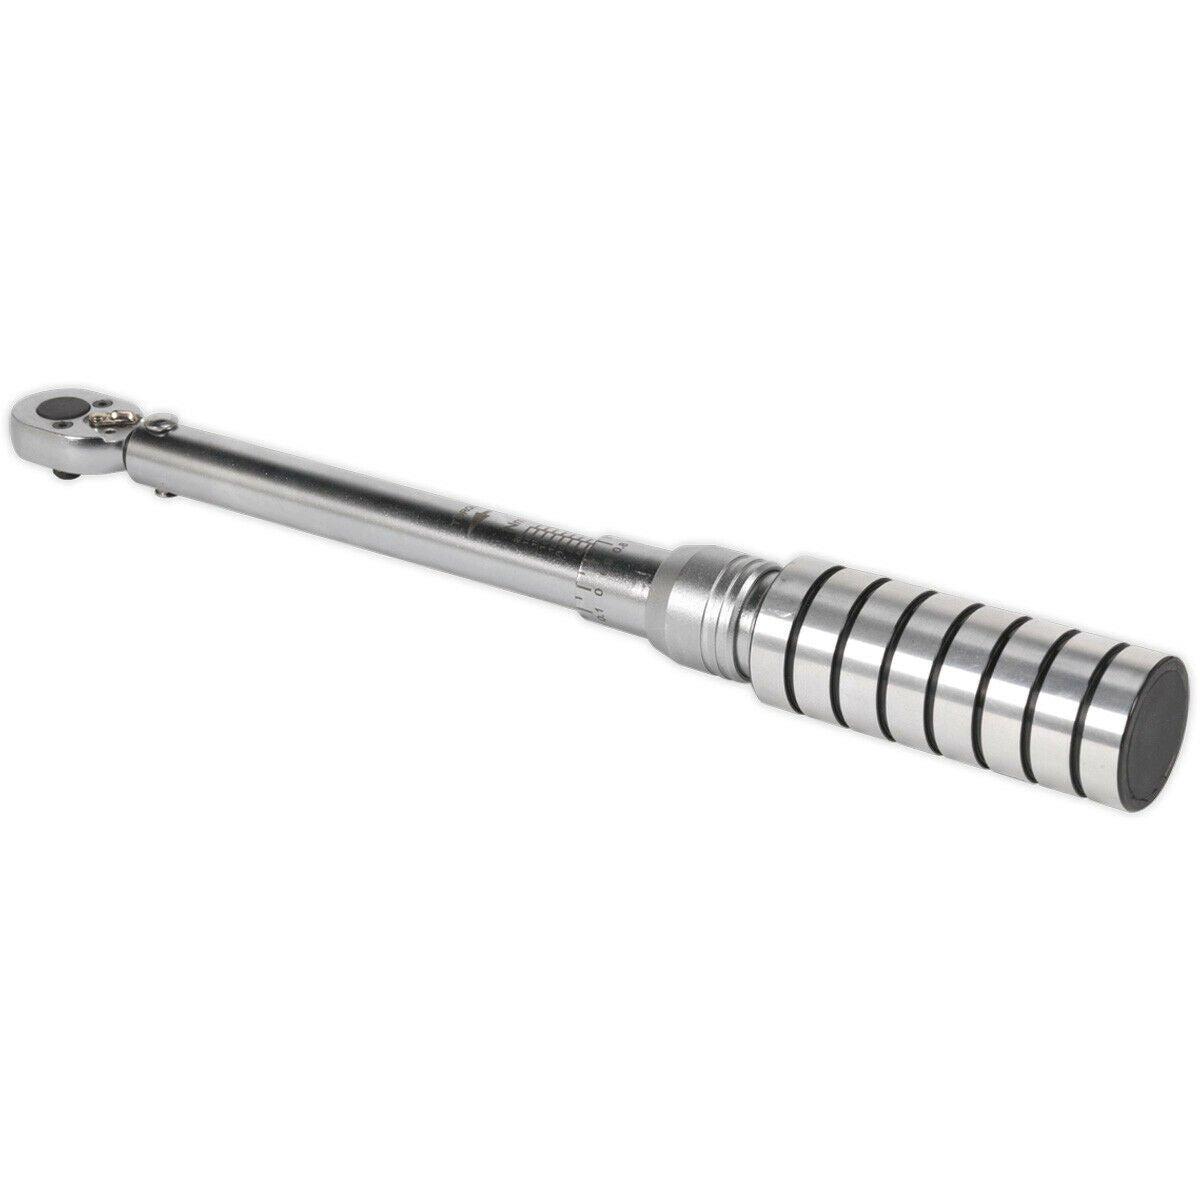 Micrometer Style Torque Wrench - 1/4